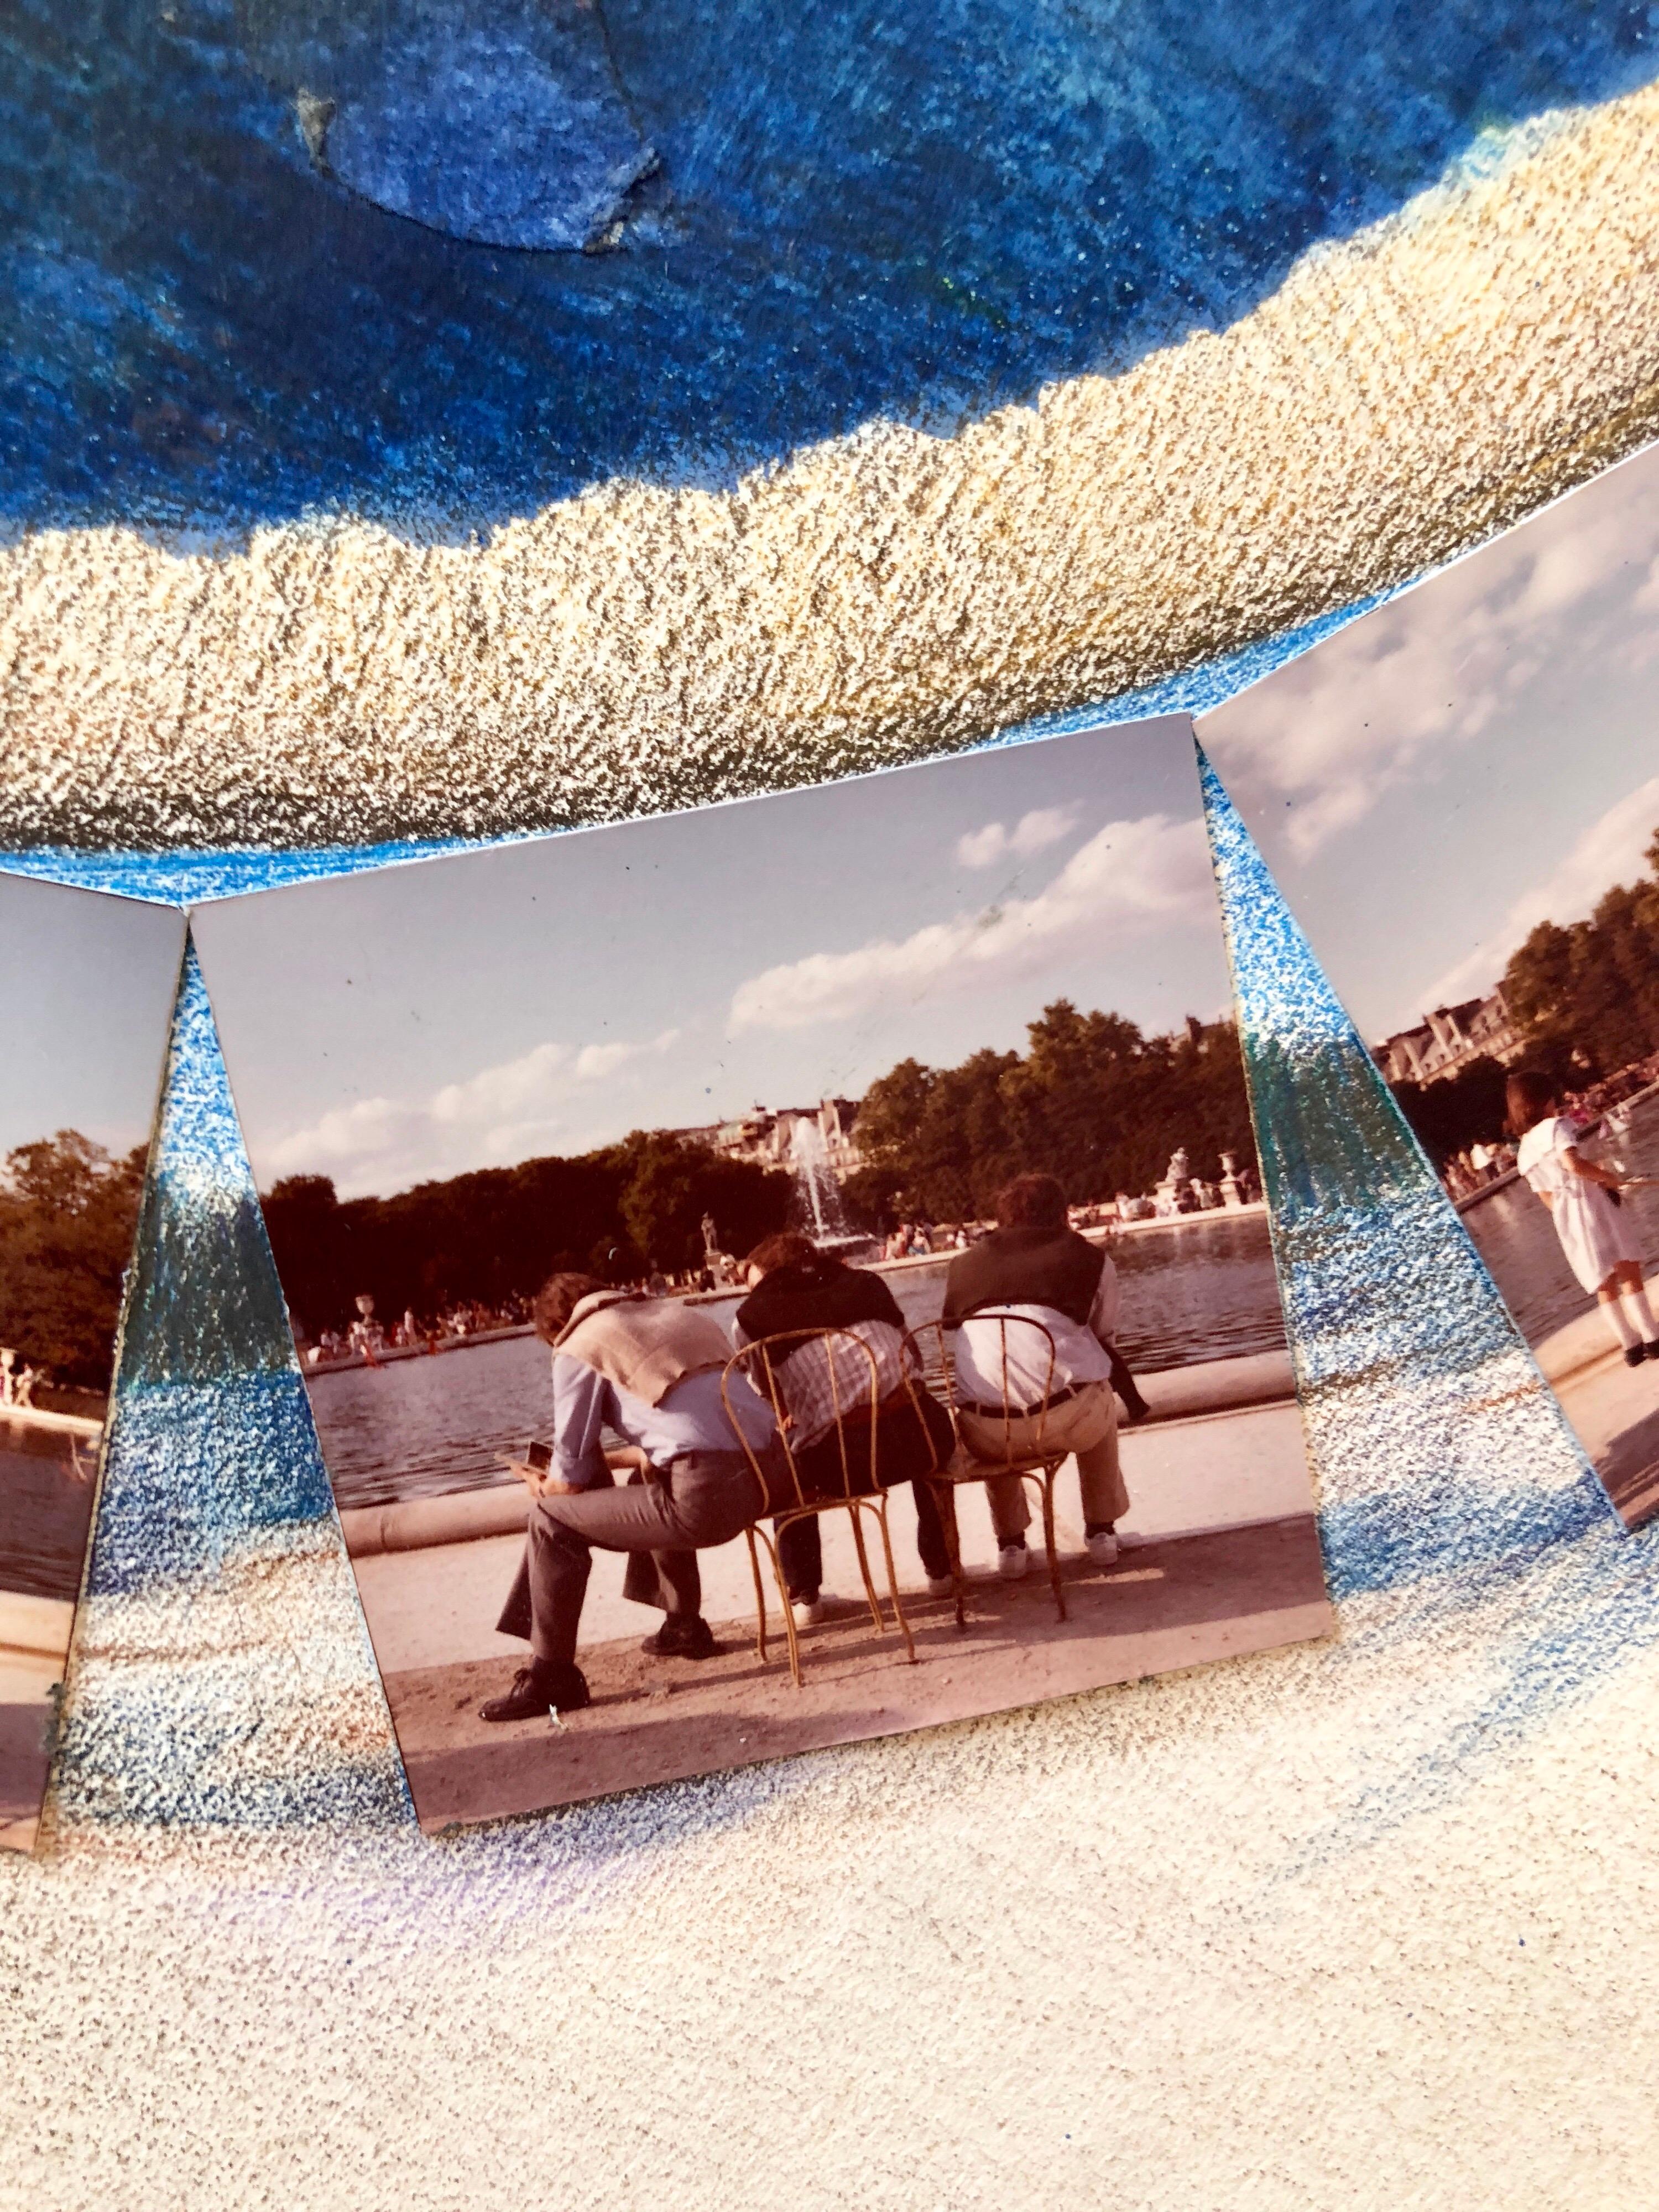 Afternoon in Tuileries Paris Boats Painting Photo Collage Photograph Assemblage  For Sale 3